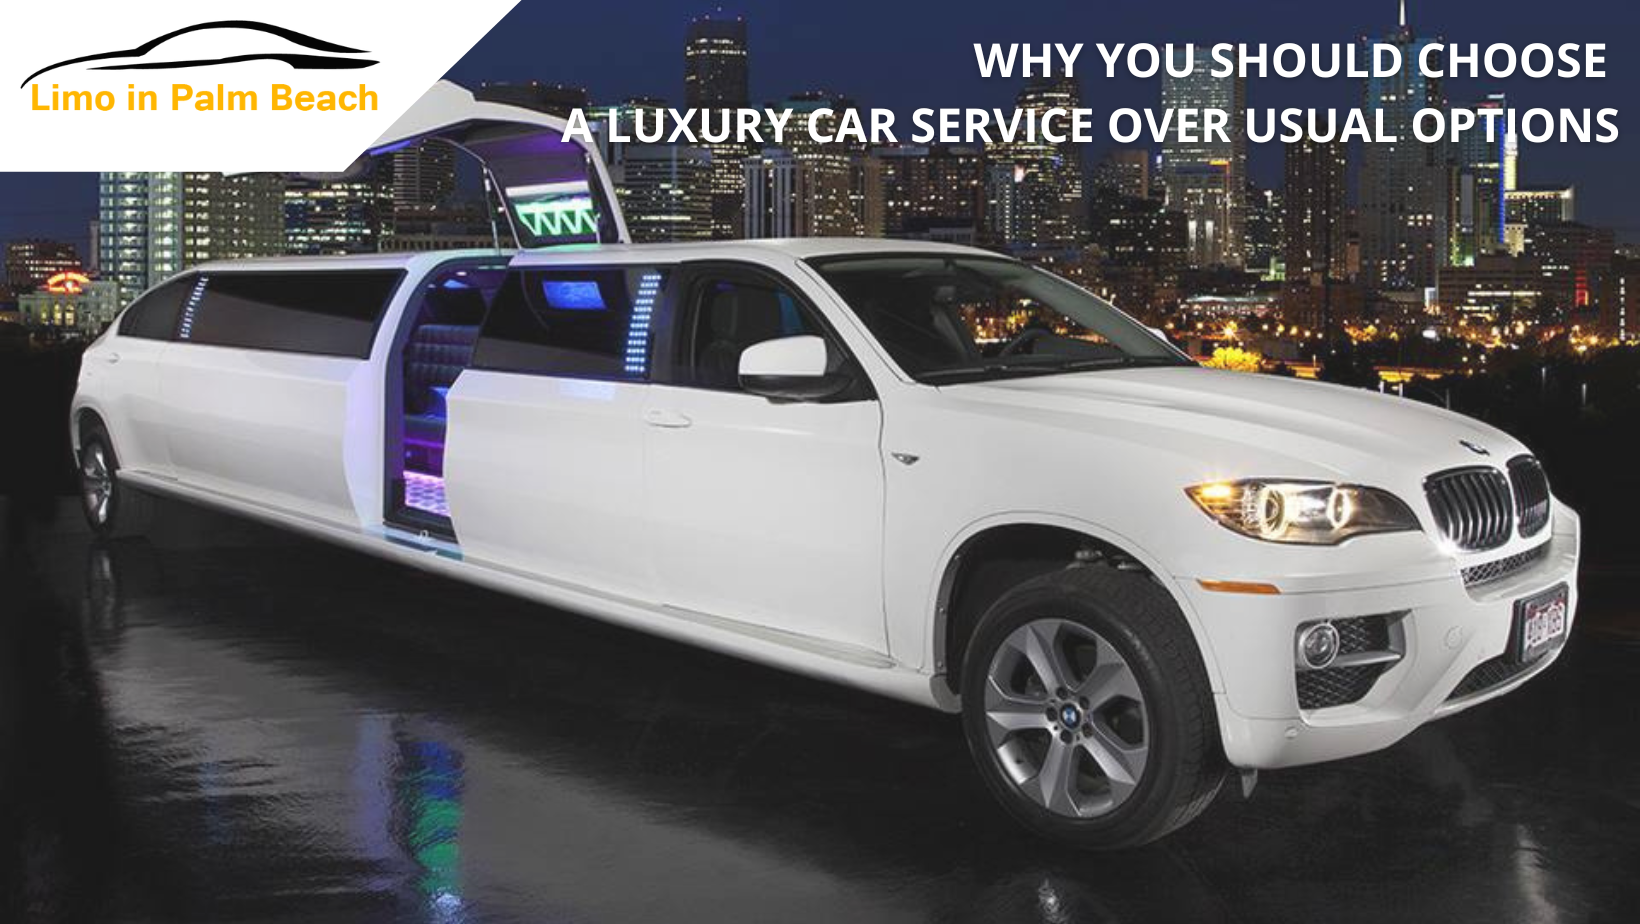 WHY YOU SHOULD CHOOSE A LUXURY CAR SERVICE OVER USUAL OPTIONS